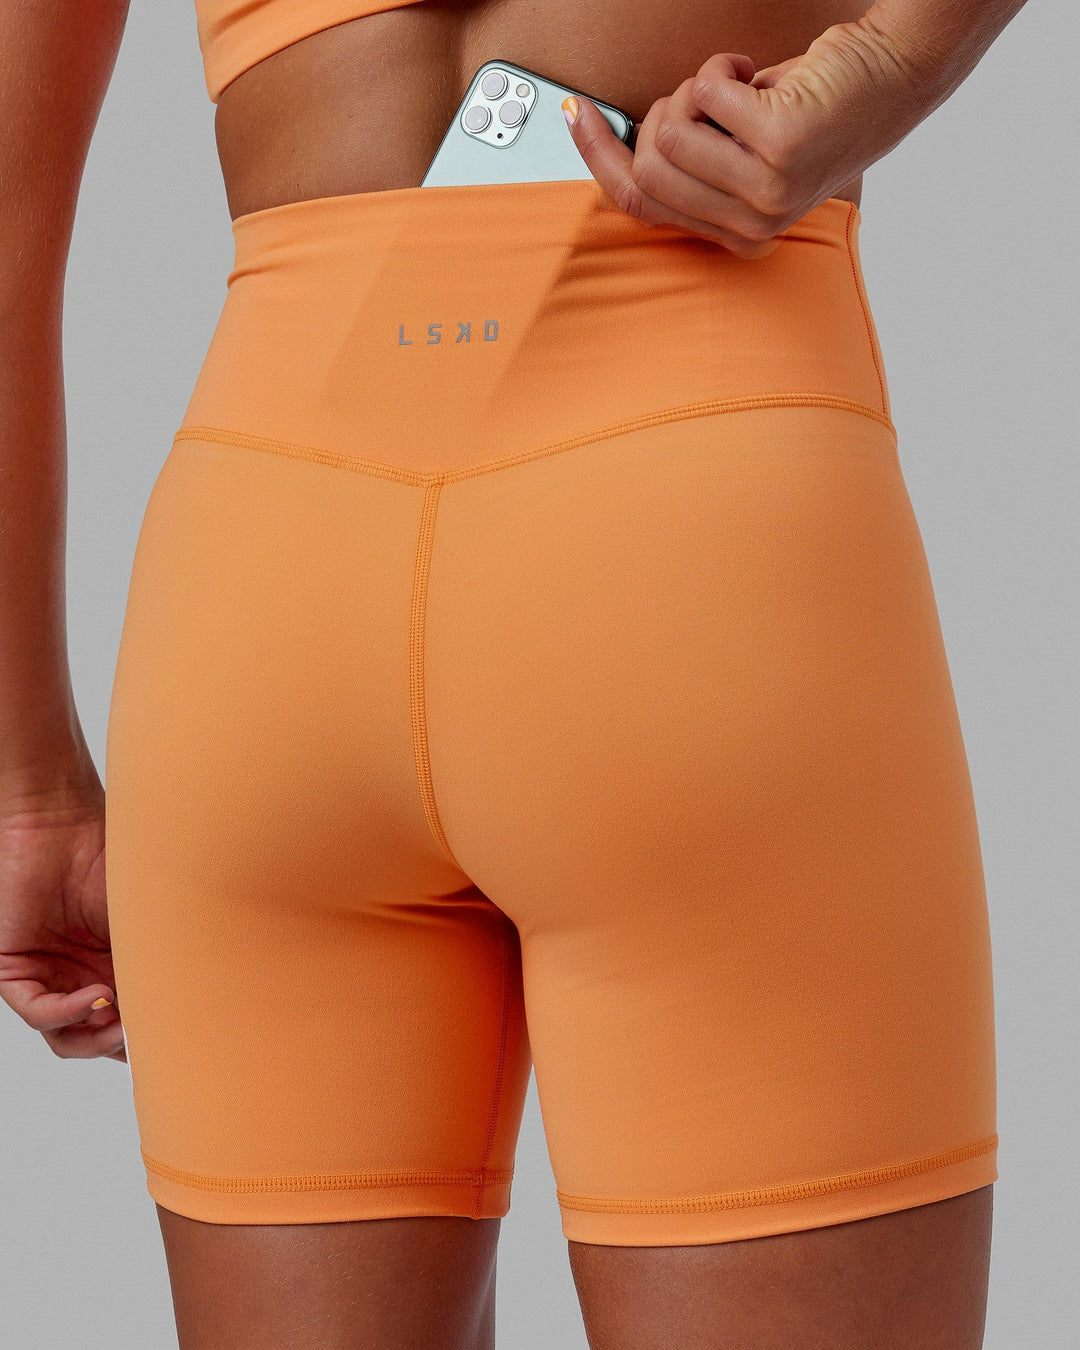 Woman wearing Evolved Mid Short Tight - Tangerine